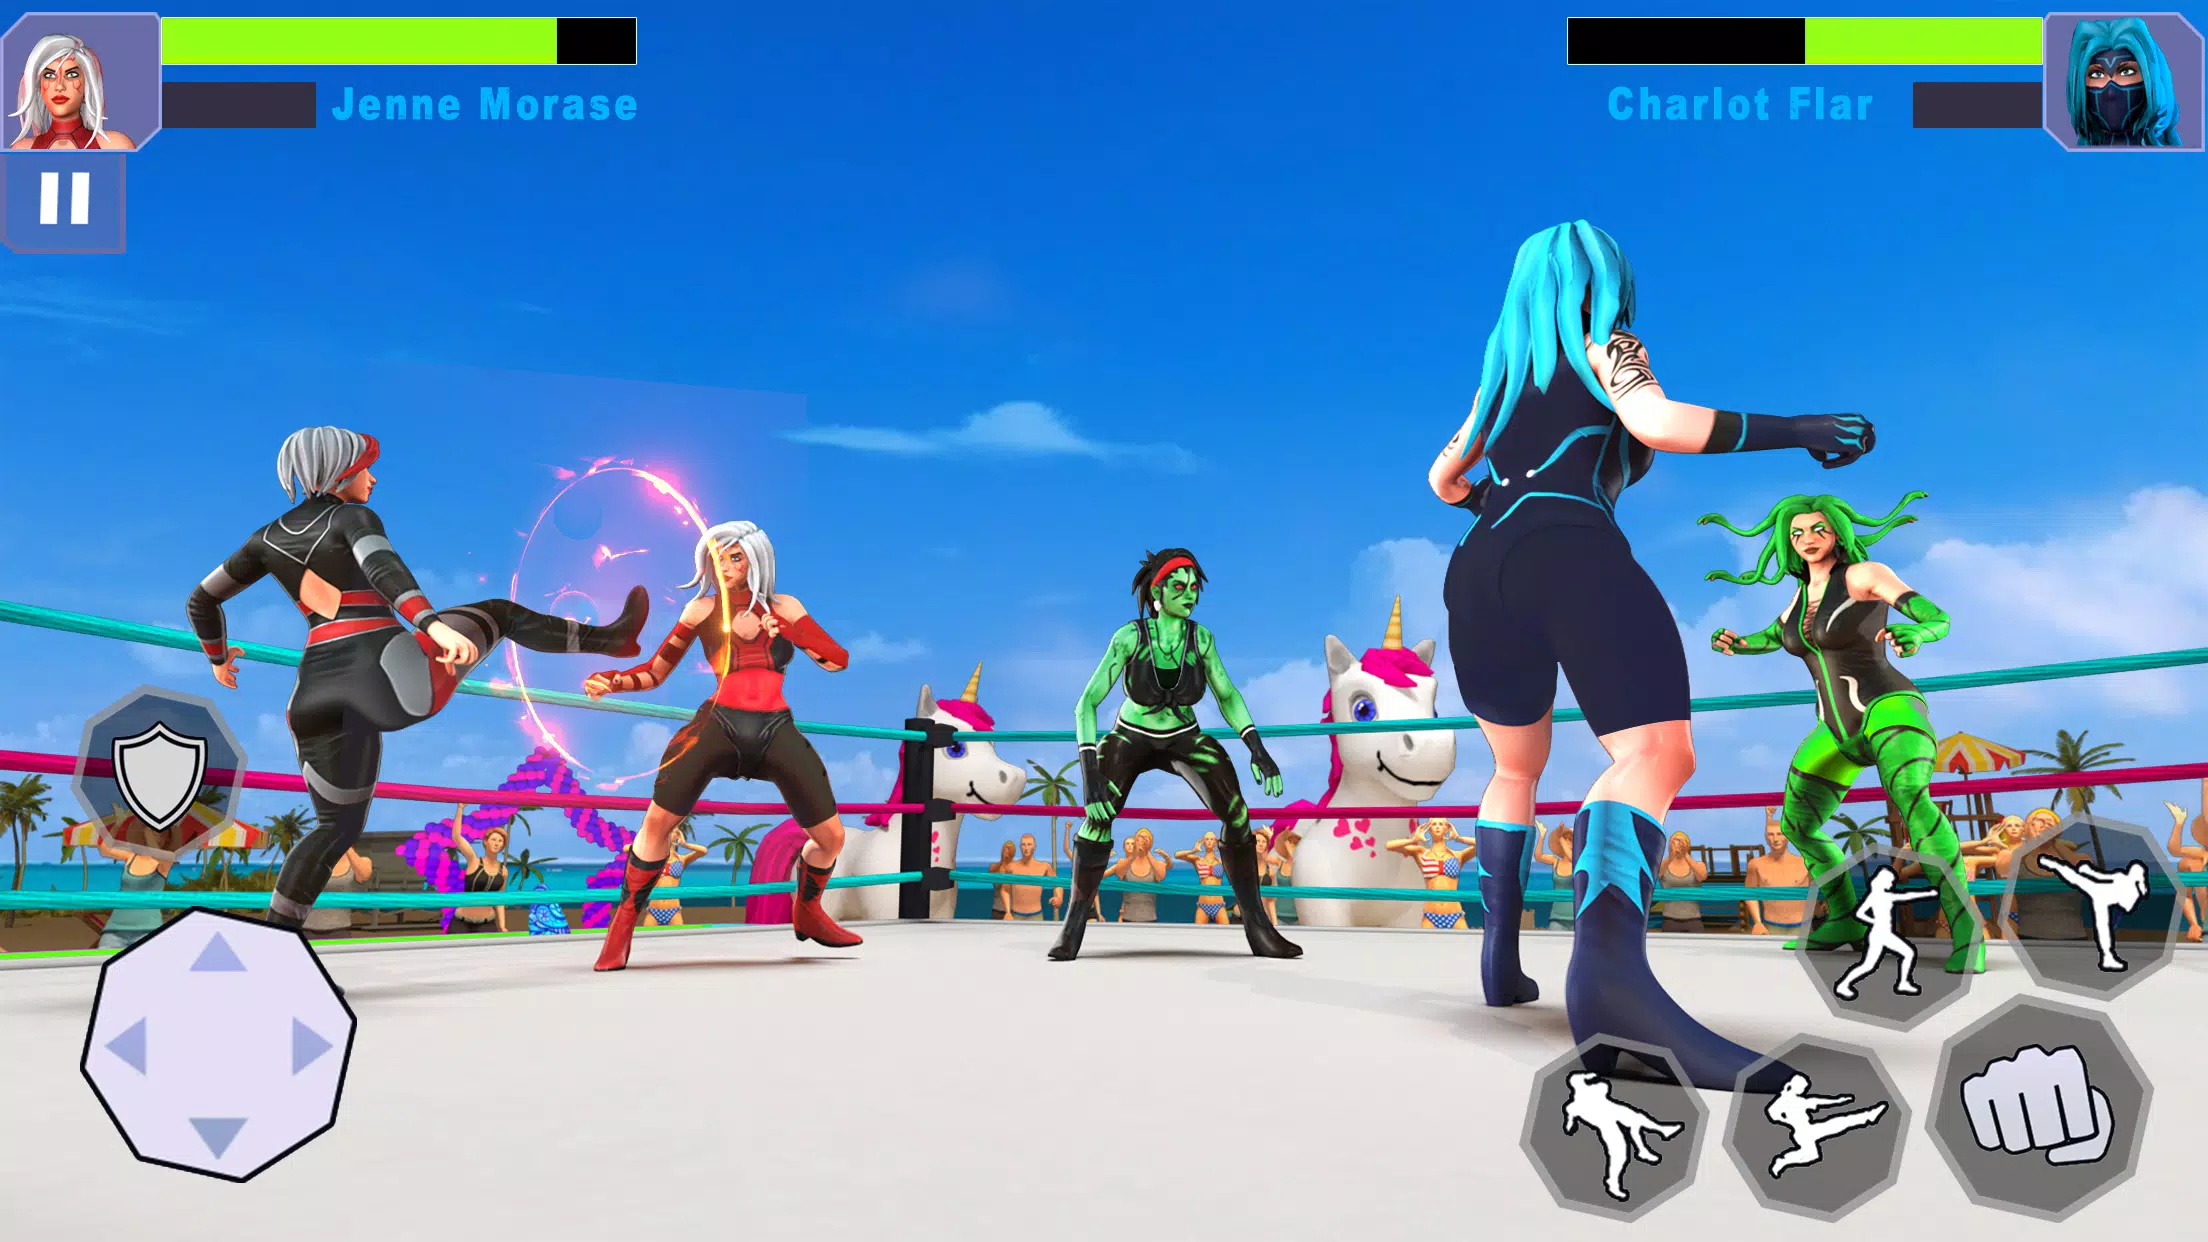 Girls wrestlers Crazy Games : Sports Live Game APK pour Android